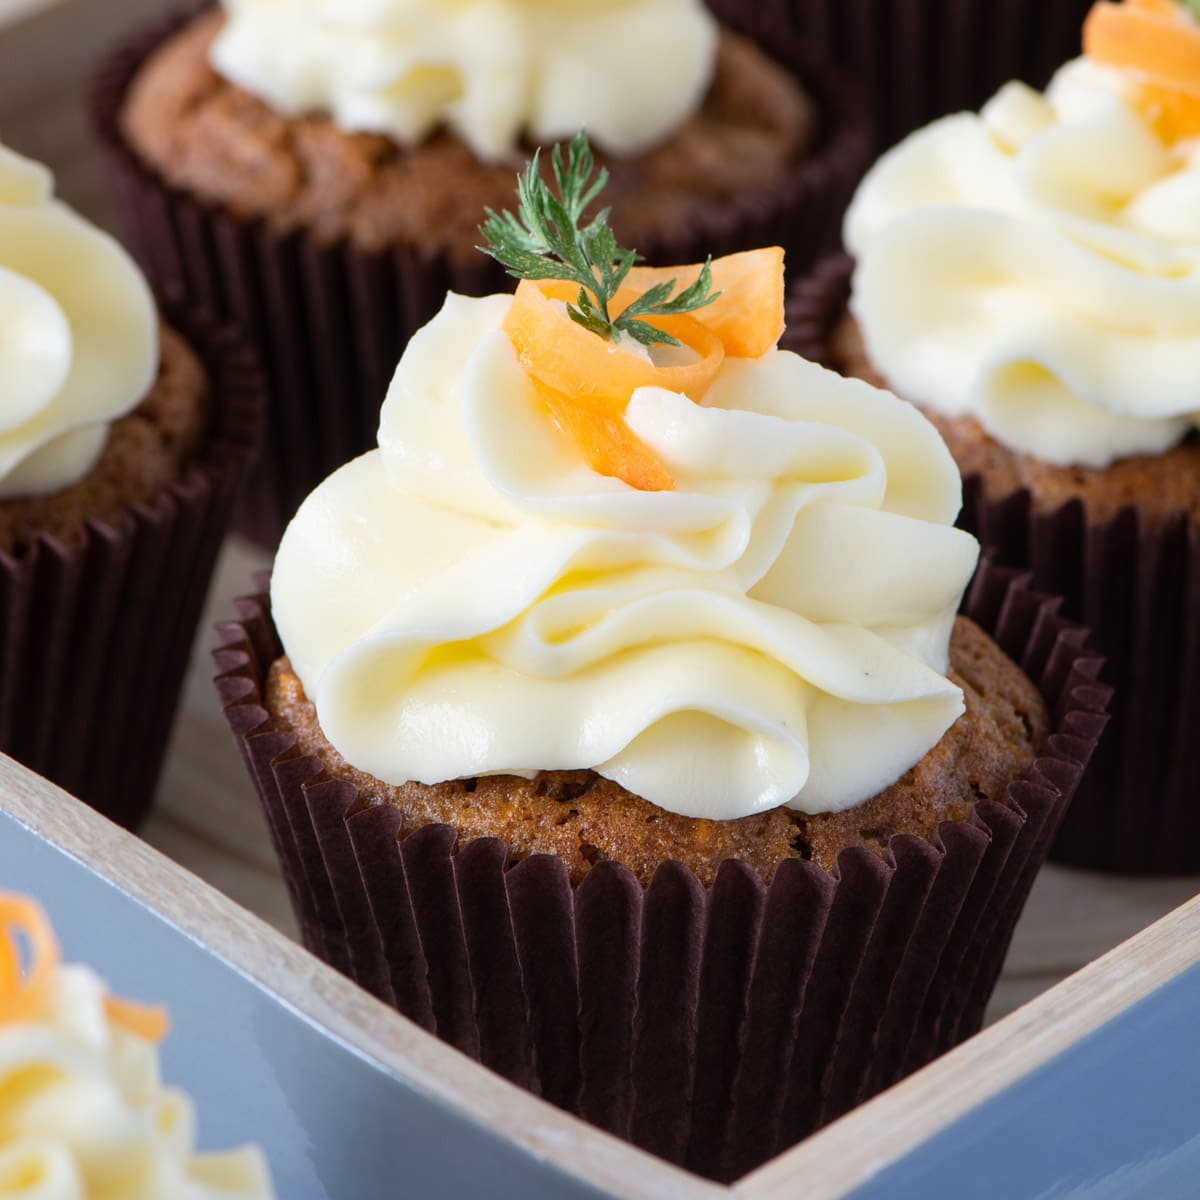 Carrot Cake Cupcakes - Delicious spiced carrot cake cupcakes topped with smooth cream cheese buttercream.